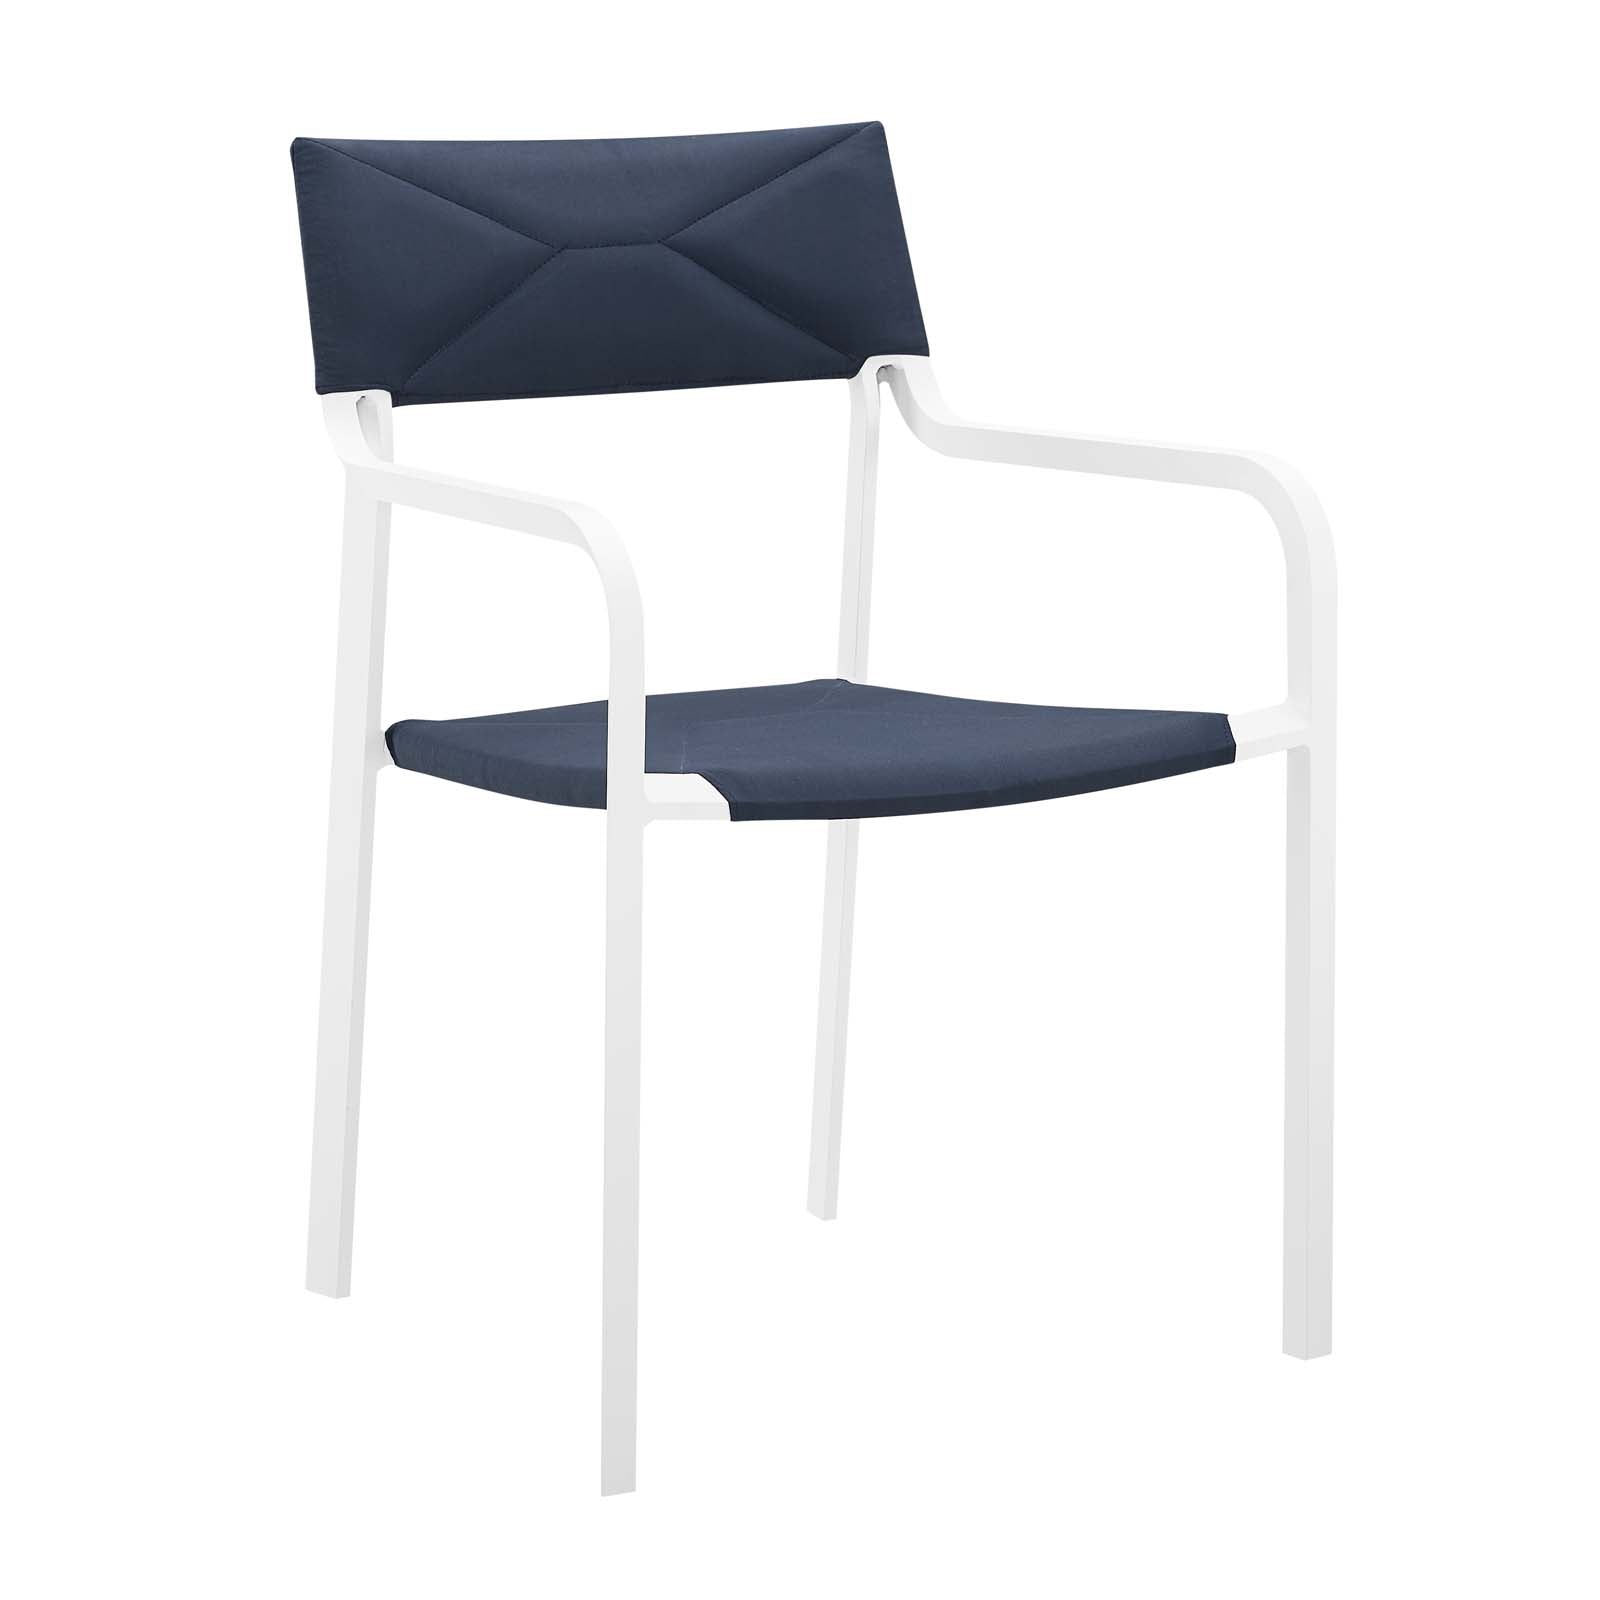 Modway Outdoor Dining Sets - Raleigh Outdoor Patio Aluminum Armchair Set of 2 White Navy